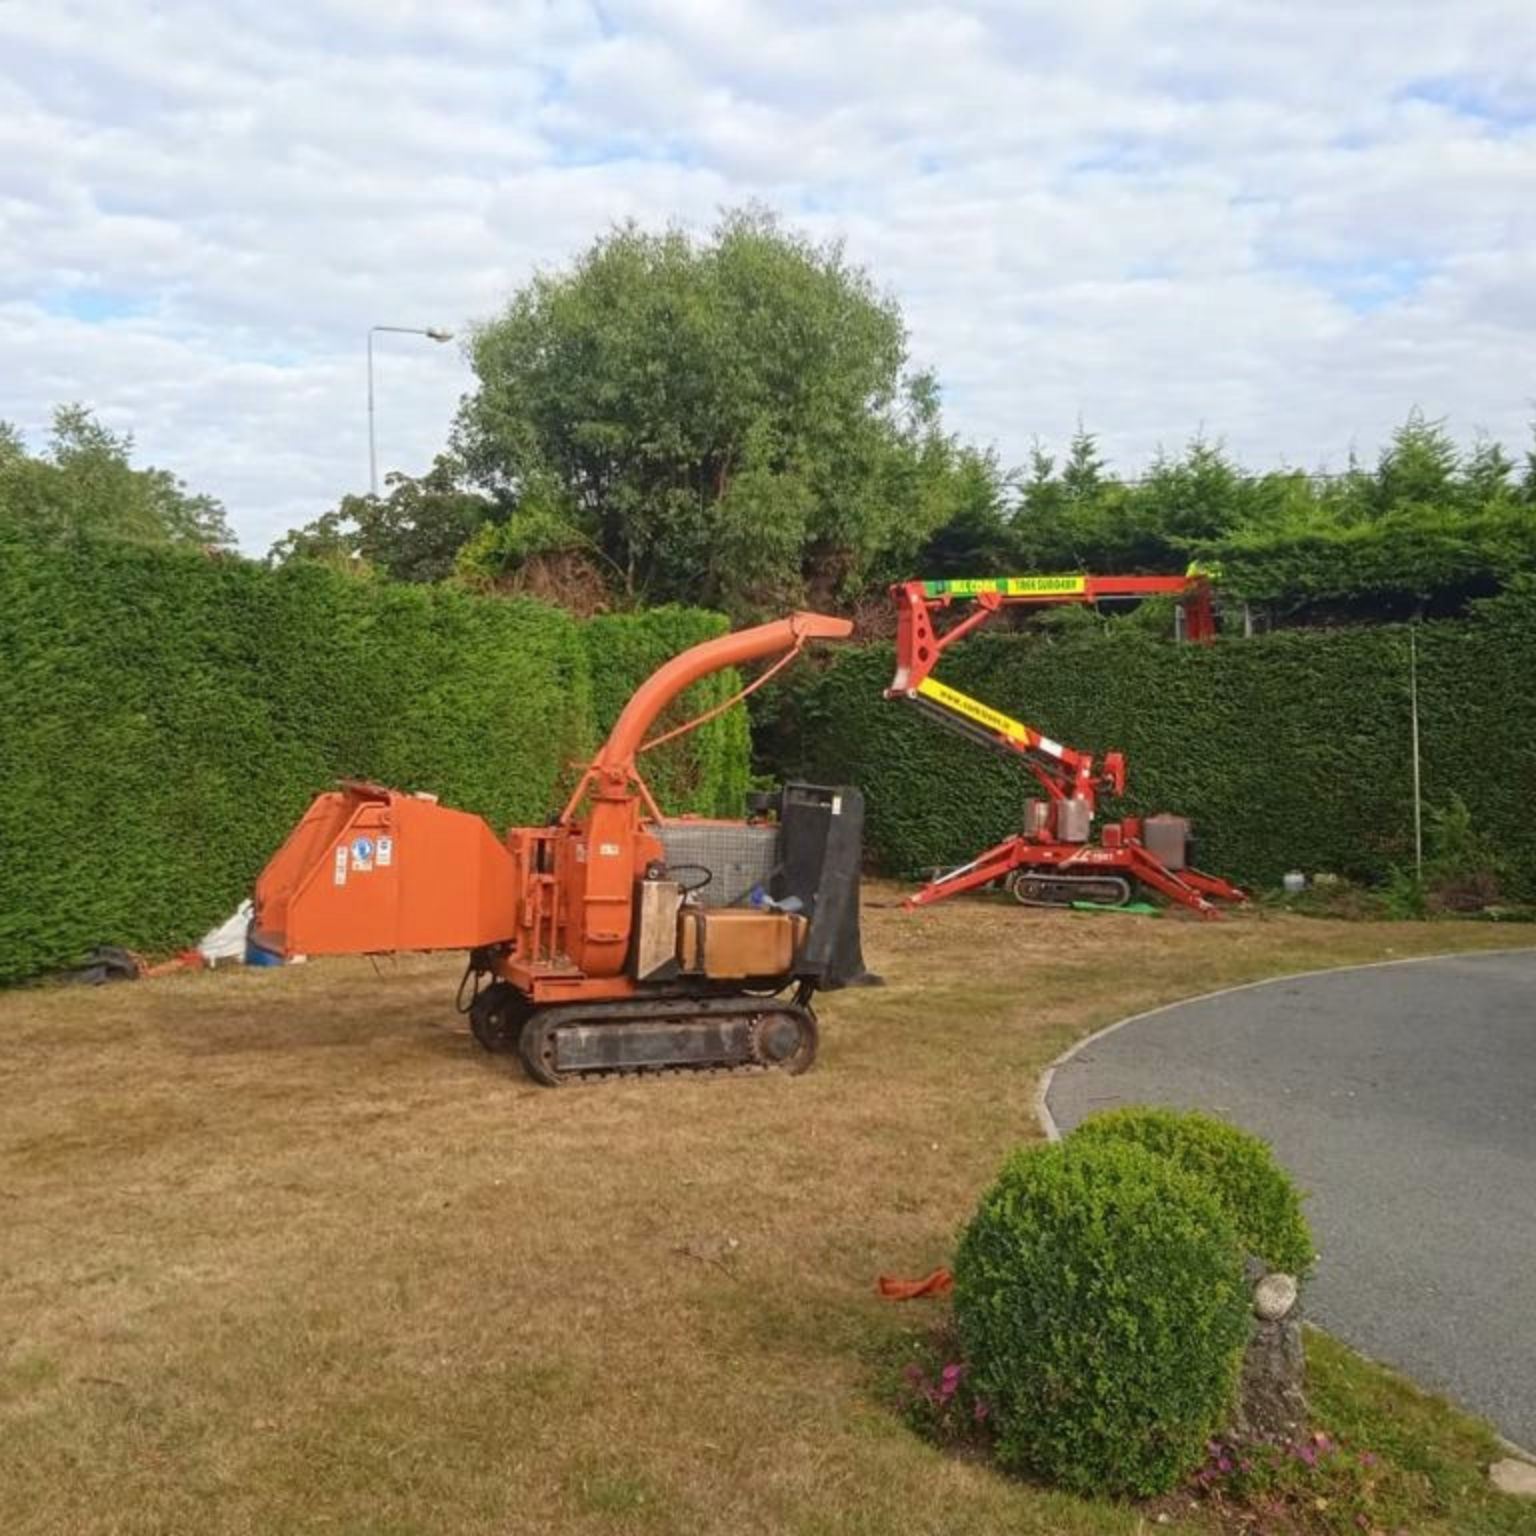 Hedge trimming equipment in the middle of a project.